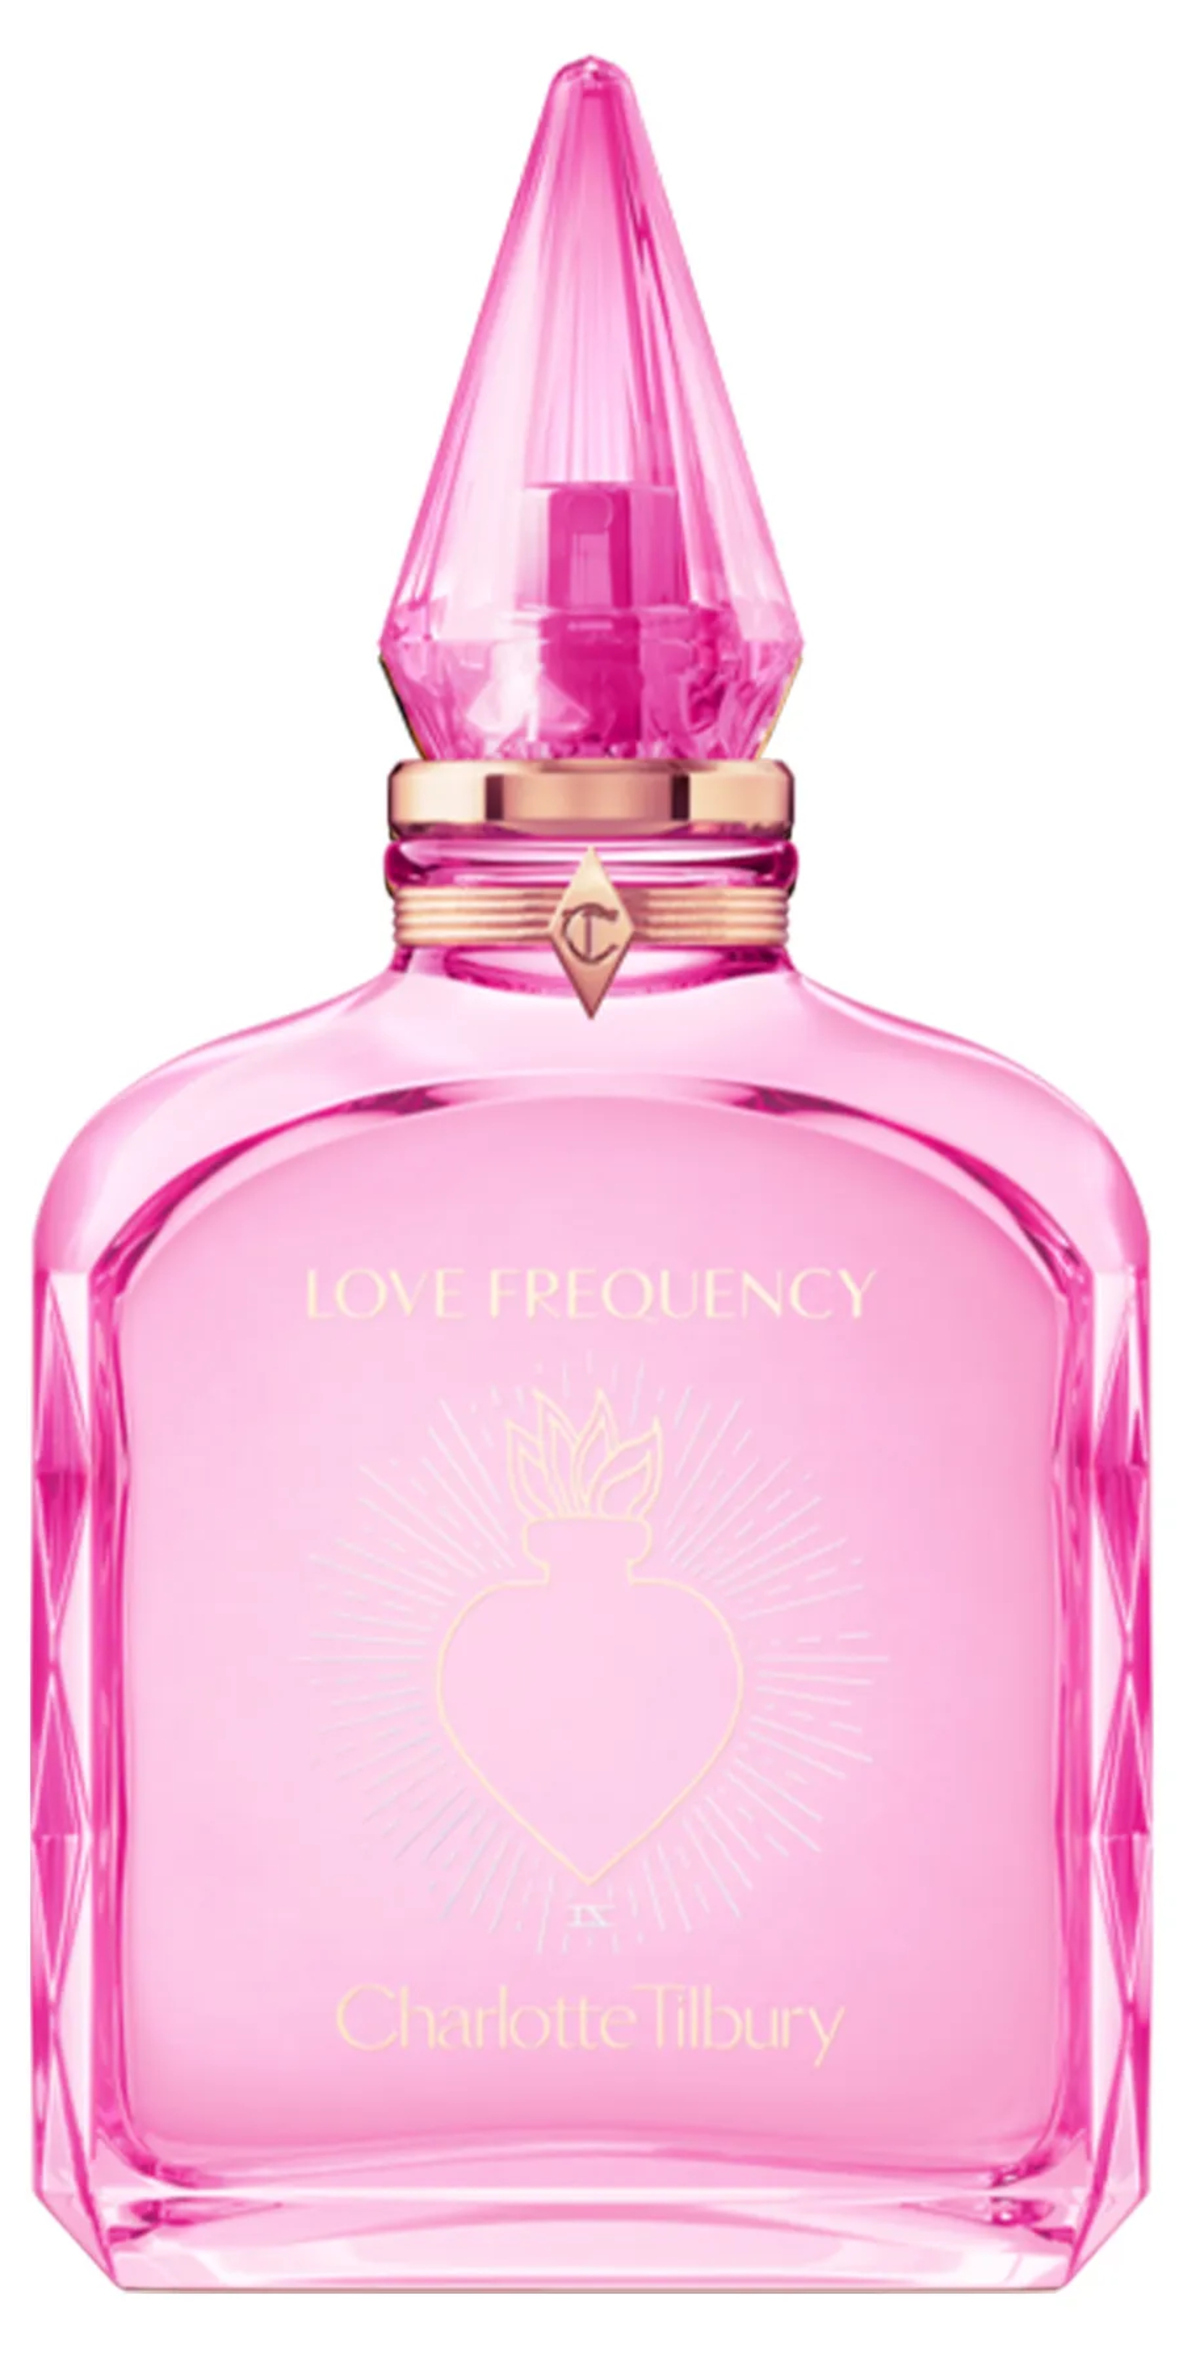 Love Frequency - Charlotte Tilbury